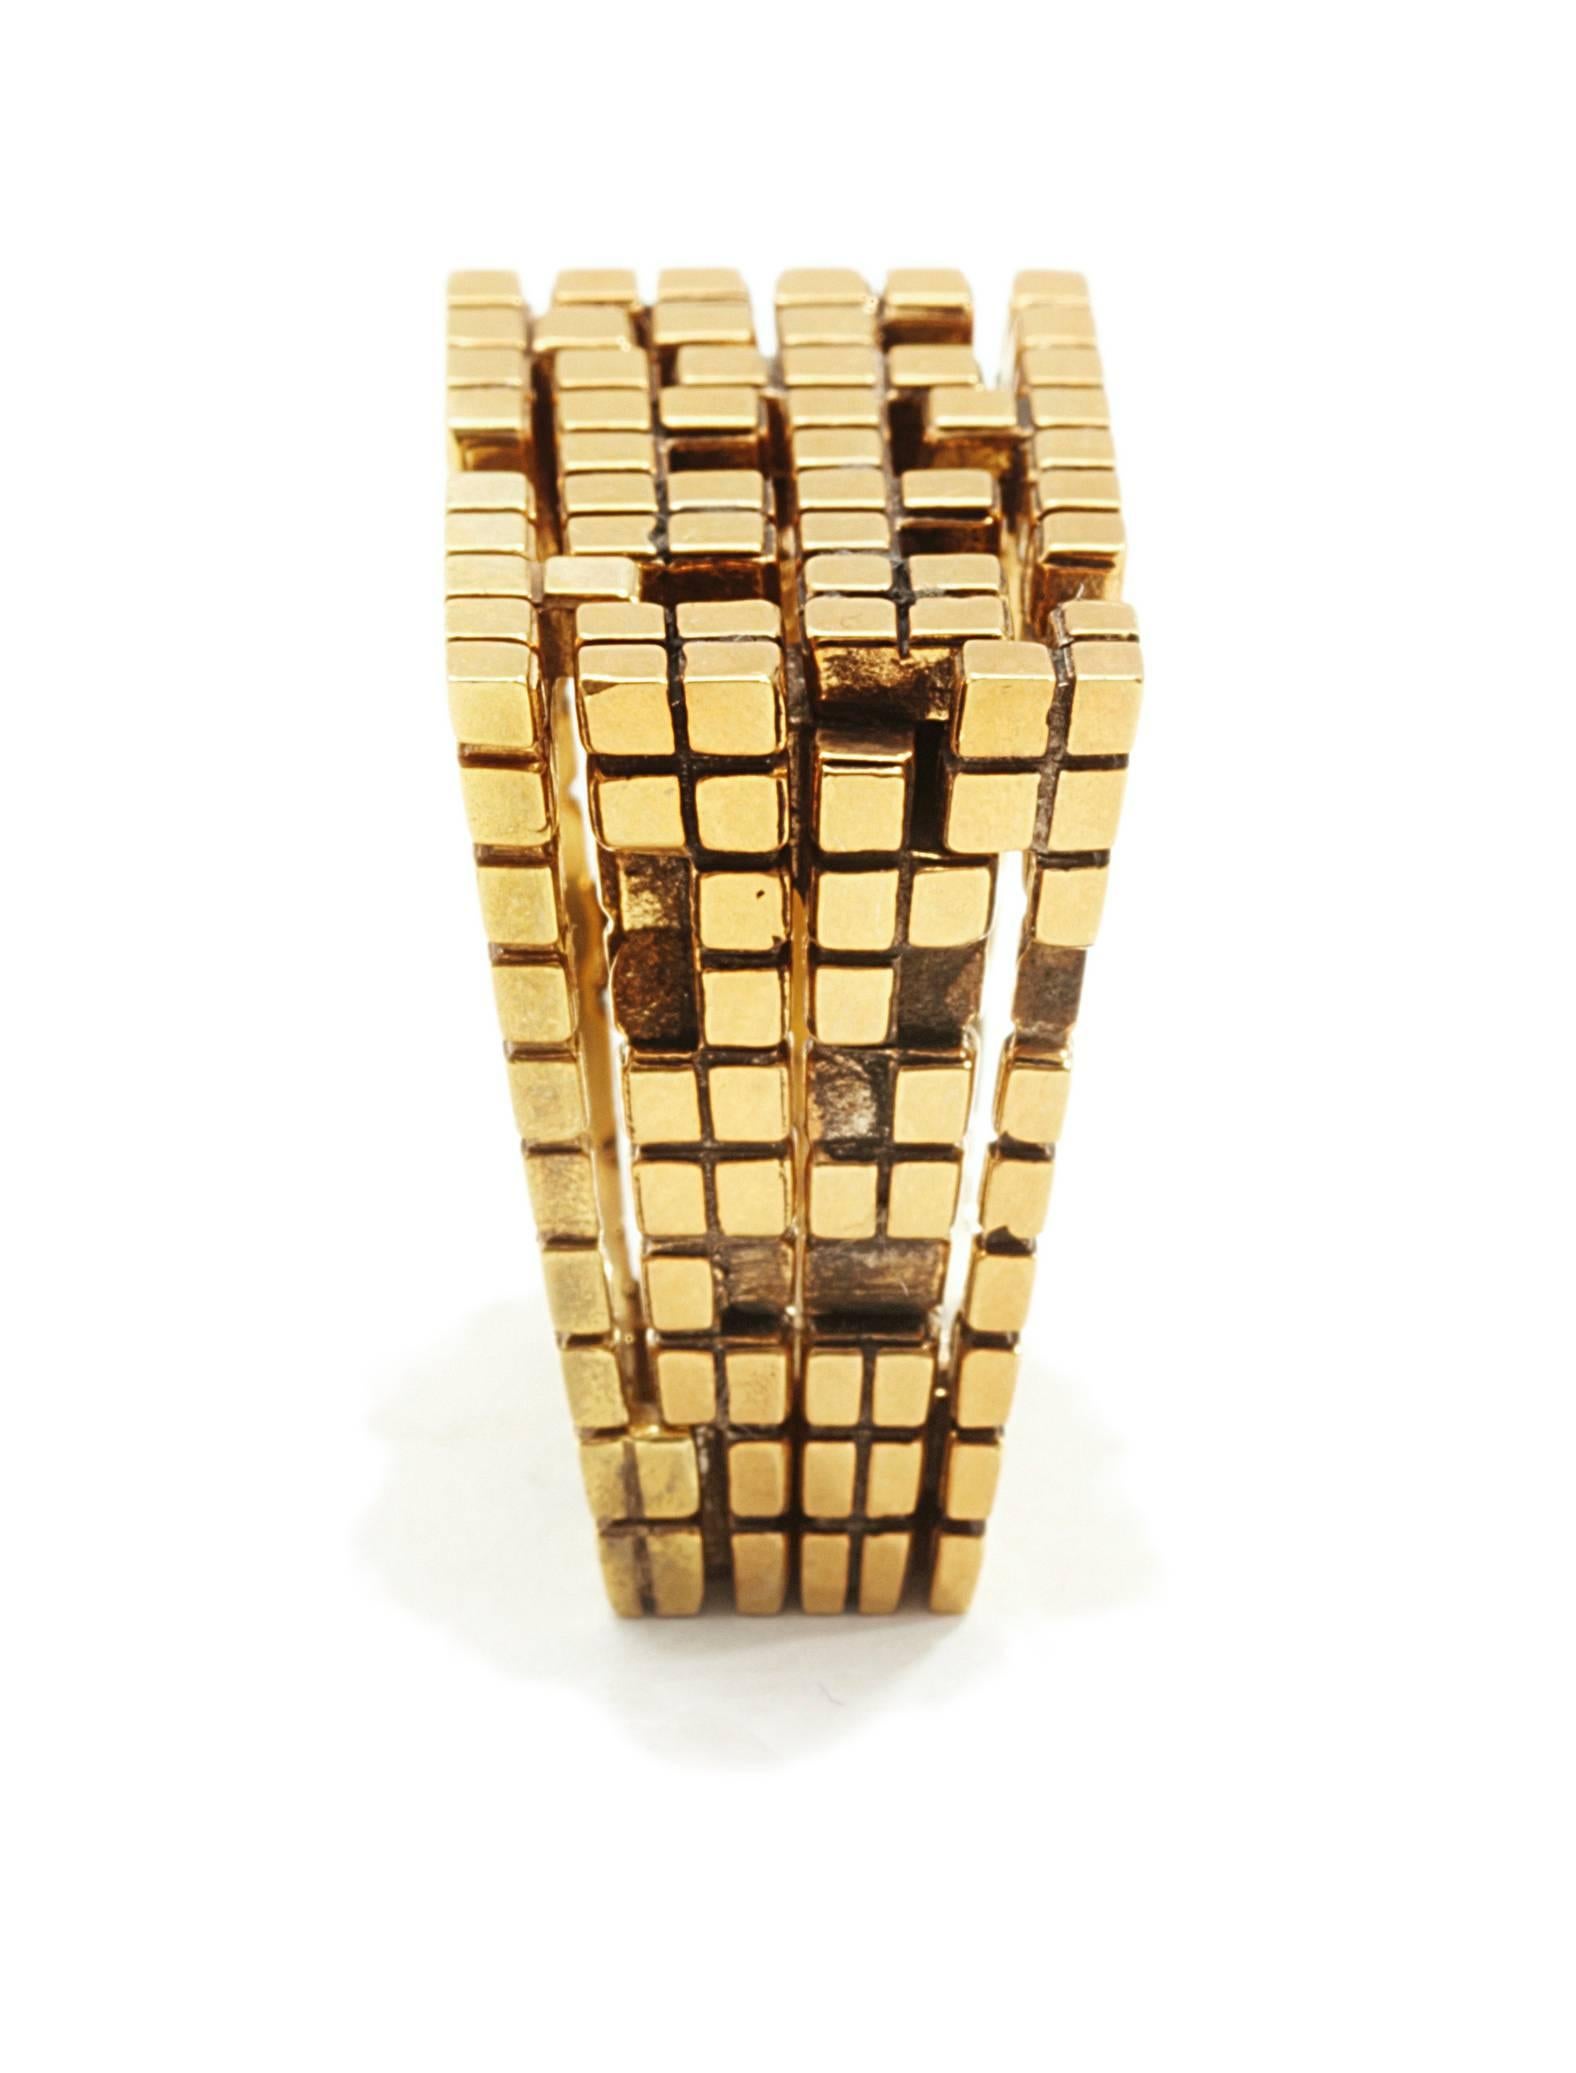 This Metatron Blockchain Four-Part Gold Ring embodies the intersection of technology and nature. A part of designer John Brevard’s Orthofract / Blockchain collection, this ring makes a statement. The Orthofract Blockchain collection features